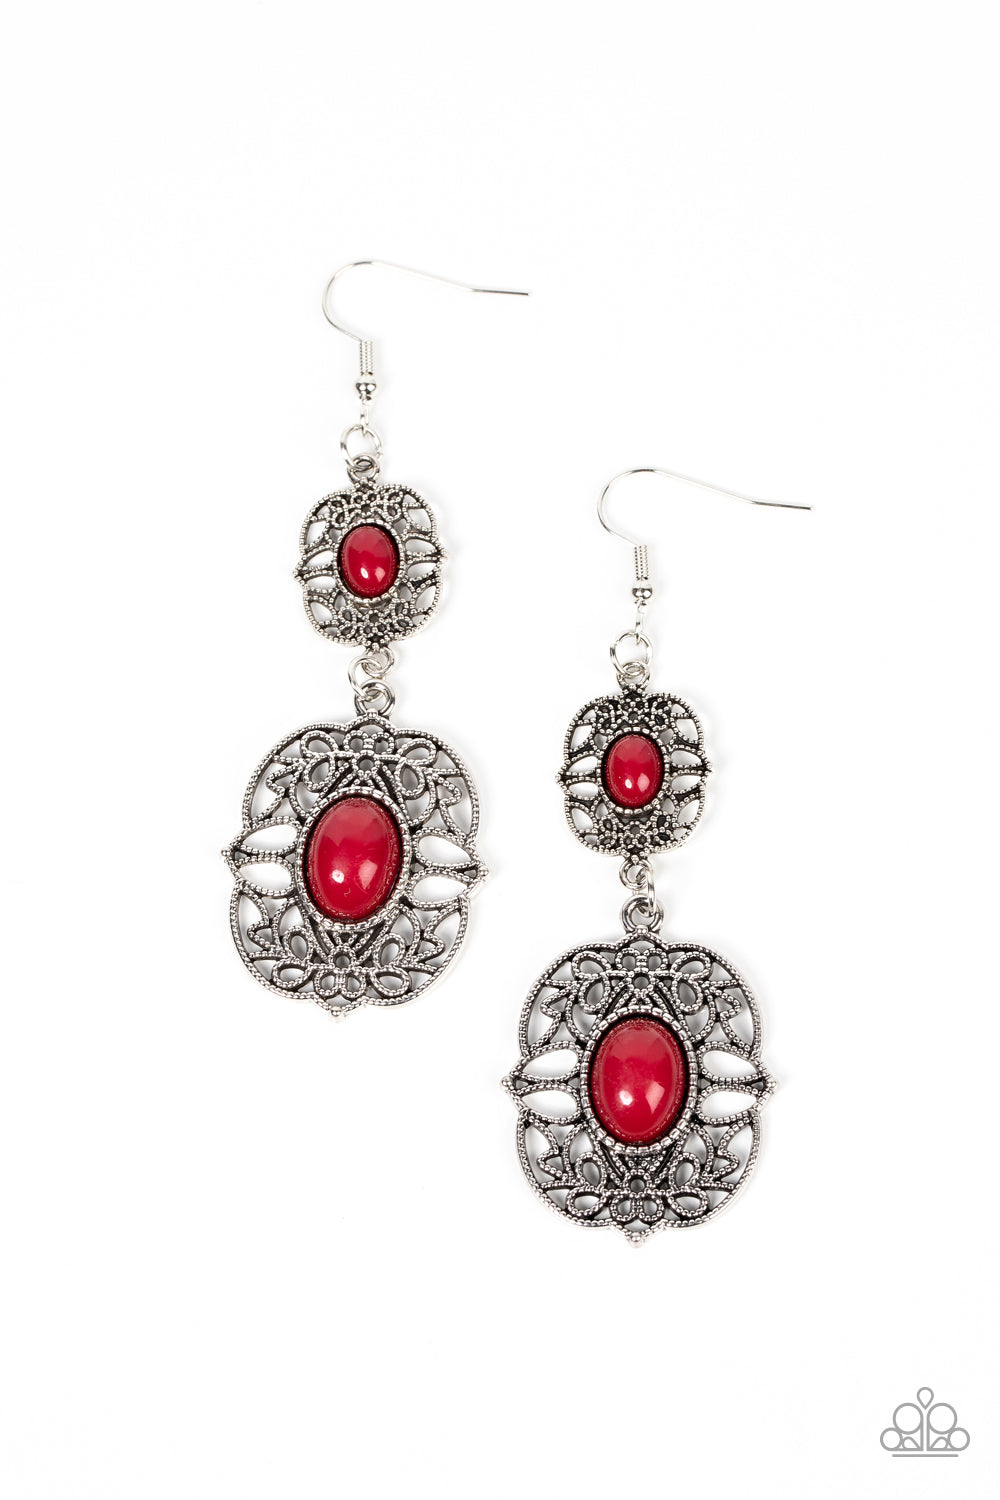 Victorian Villa - Red Wine and Silver Earrings - Paparazzi Accessories - Dotted with wine beaded centers, studded vine-like filigree blooms into two silver floral frames that link into a vintage inspired lure. Earring attaches to a standard fishhook fitting. Sold as one pair of earrings.